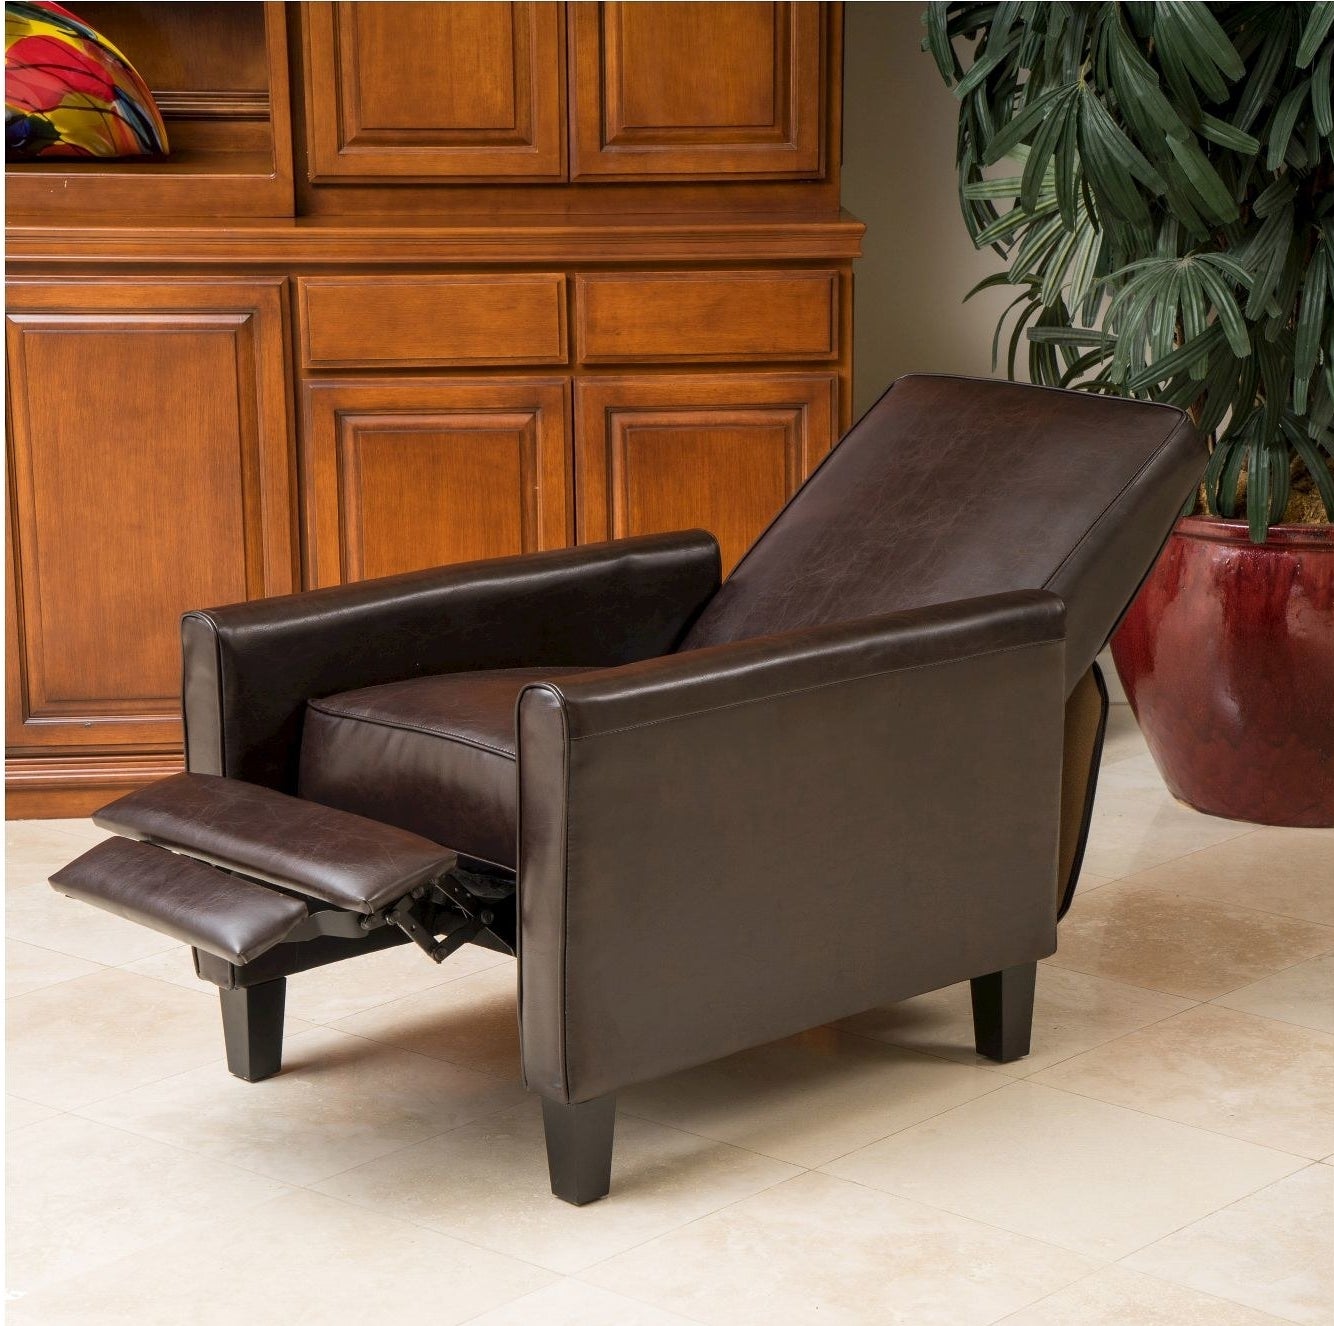 A brown reclining chair in a living room